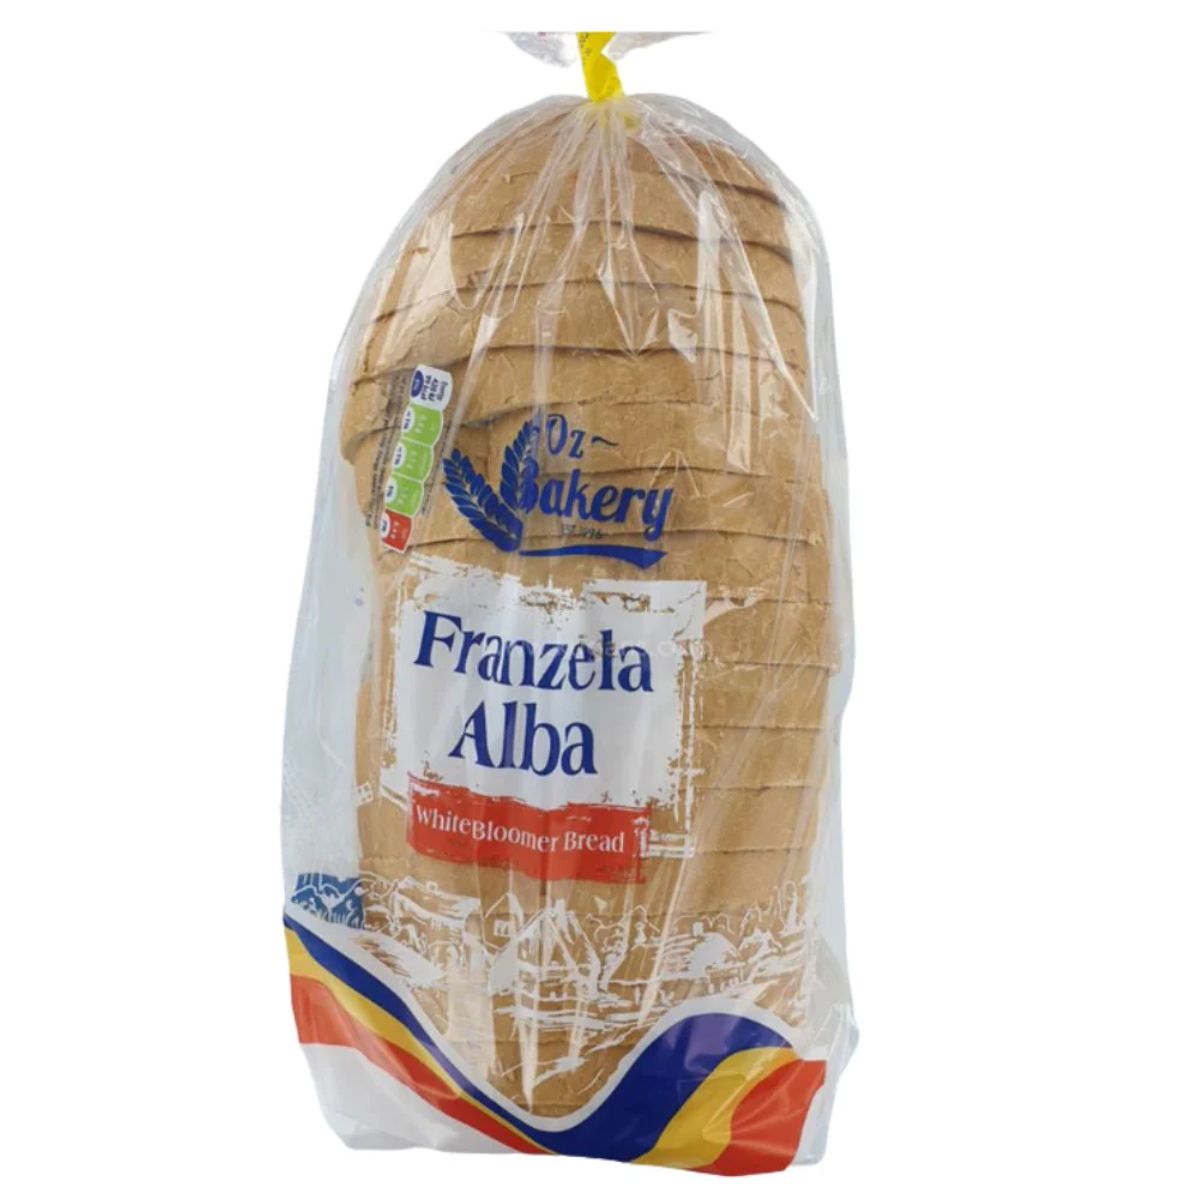 A bag of Oz Bakery - Franzela Alba - 500g with a label on it.